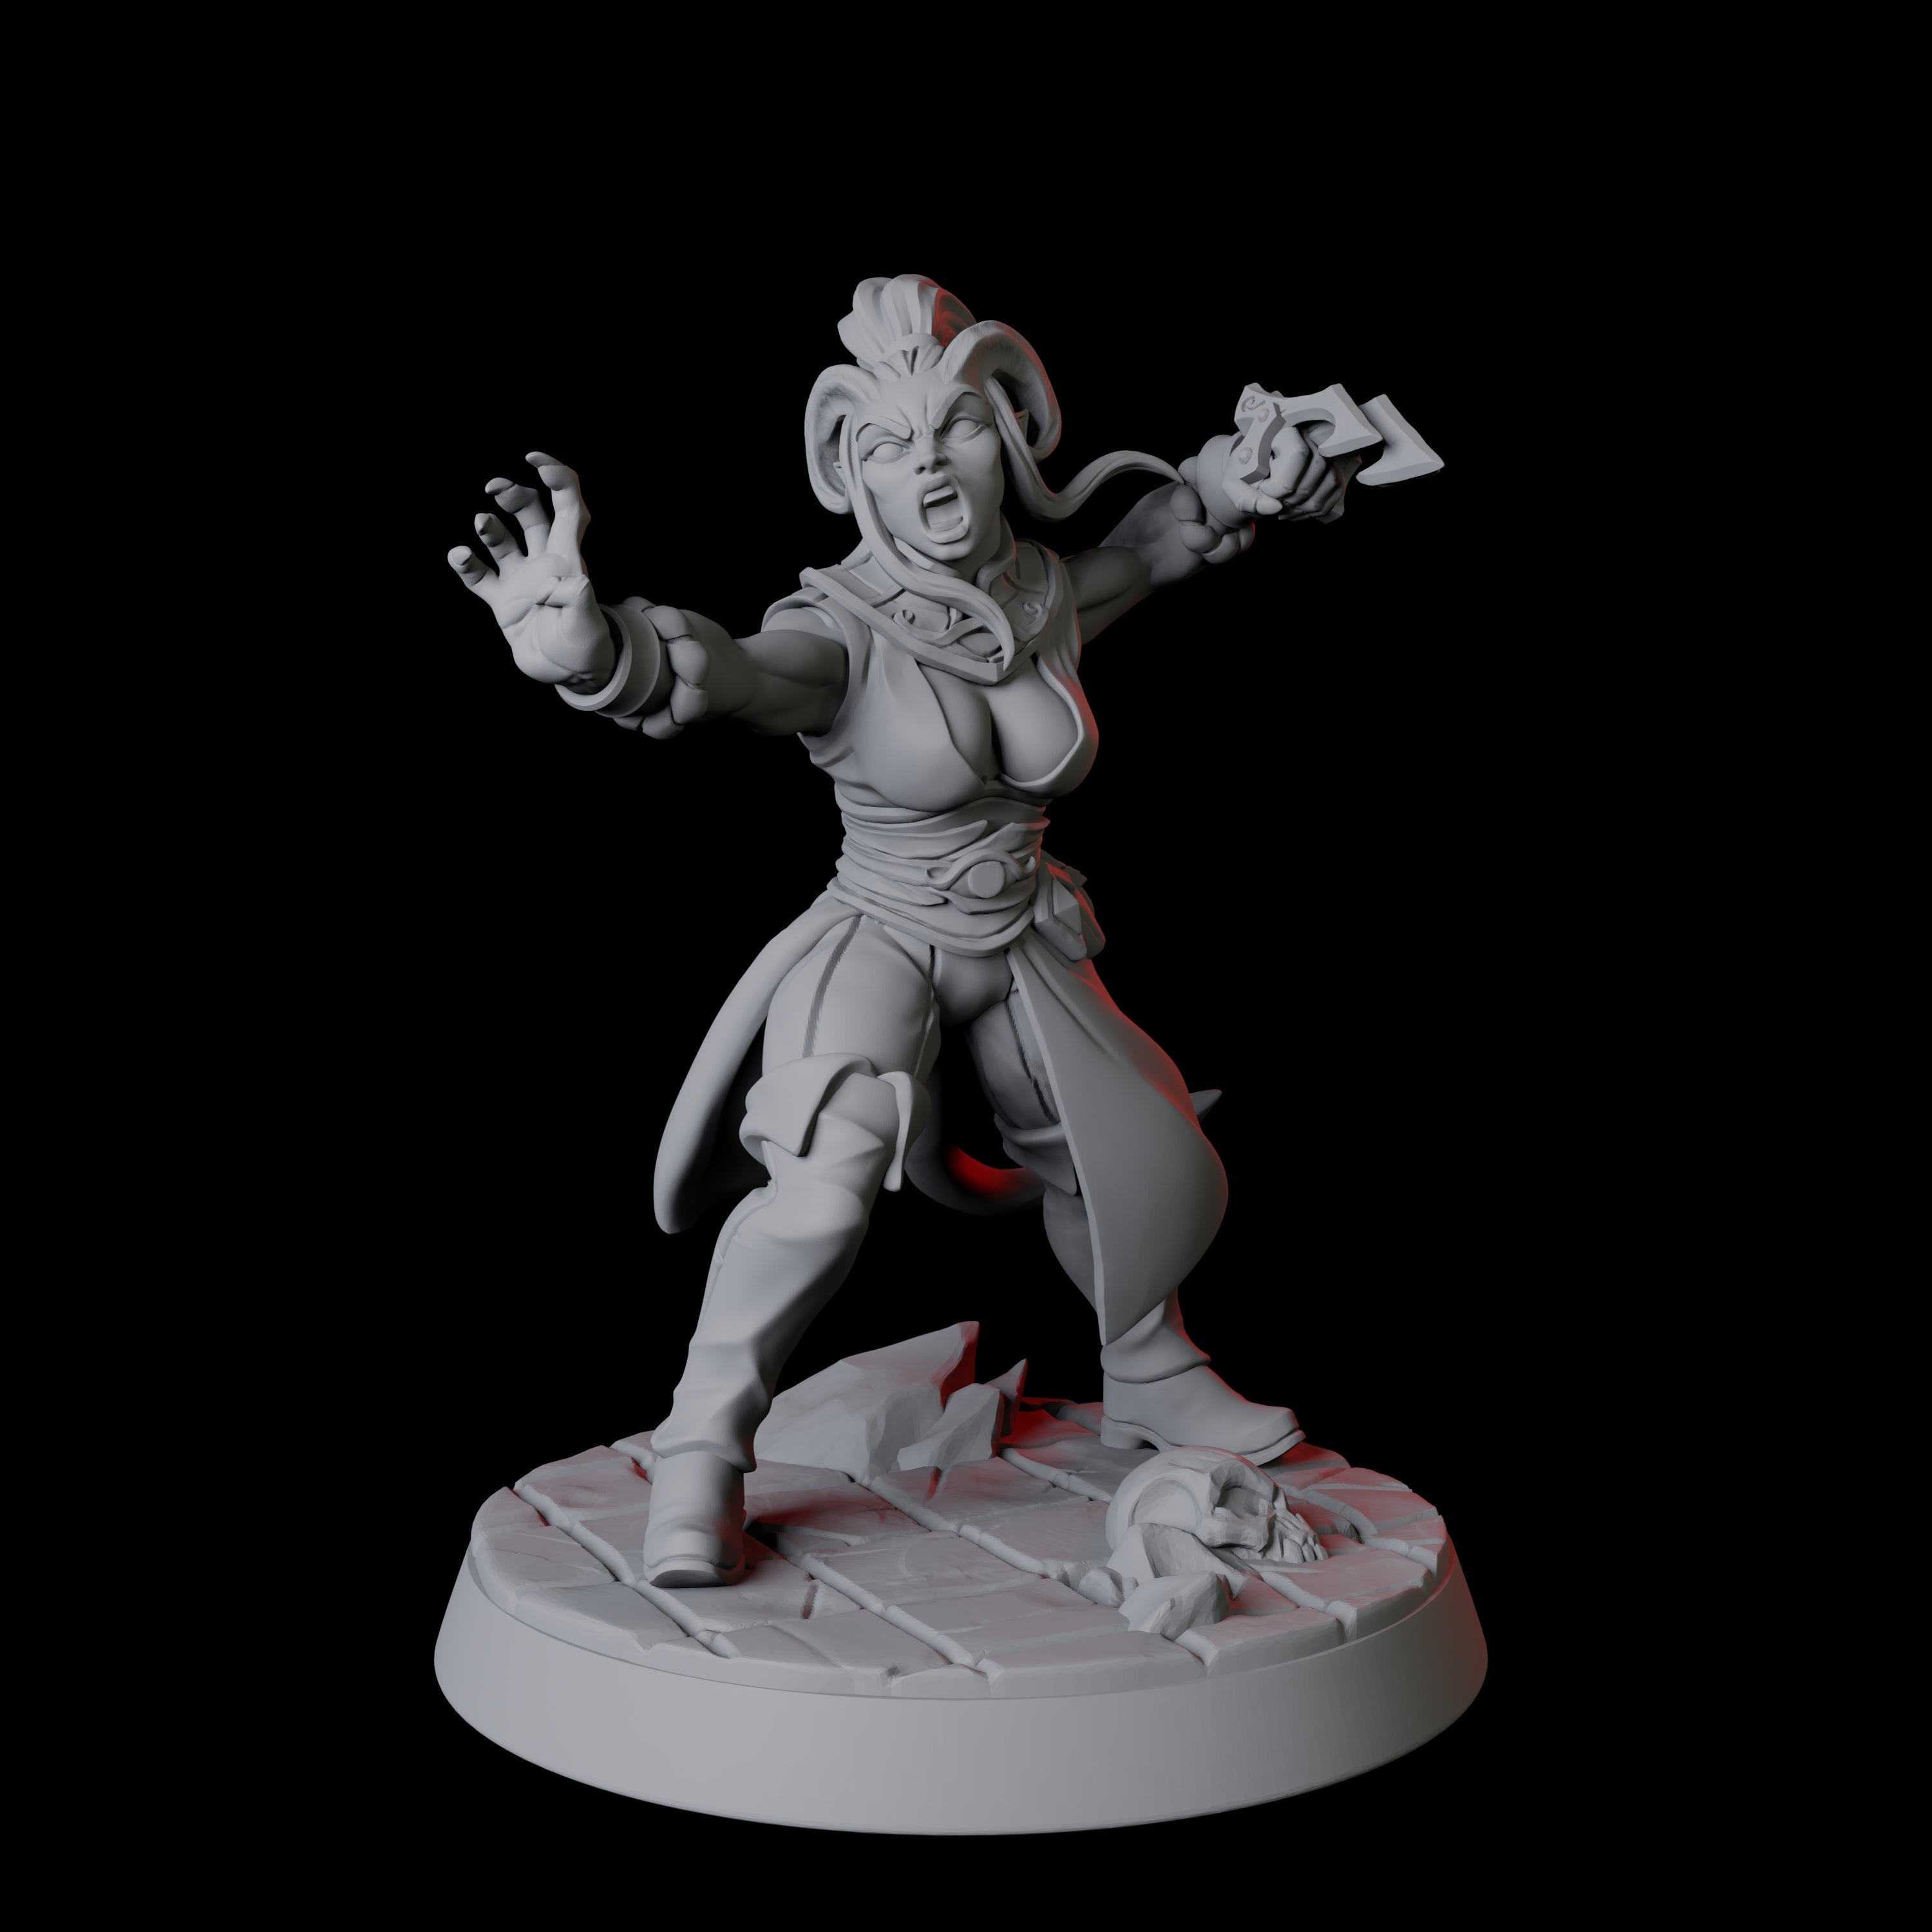 Tiefling Monk F Miniature for Dungeons and Dragons, Pathfinder or other TTRPGs